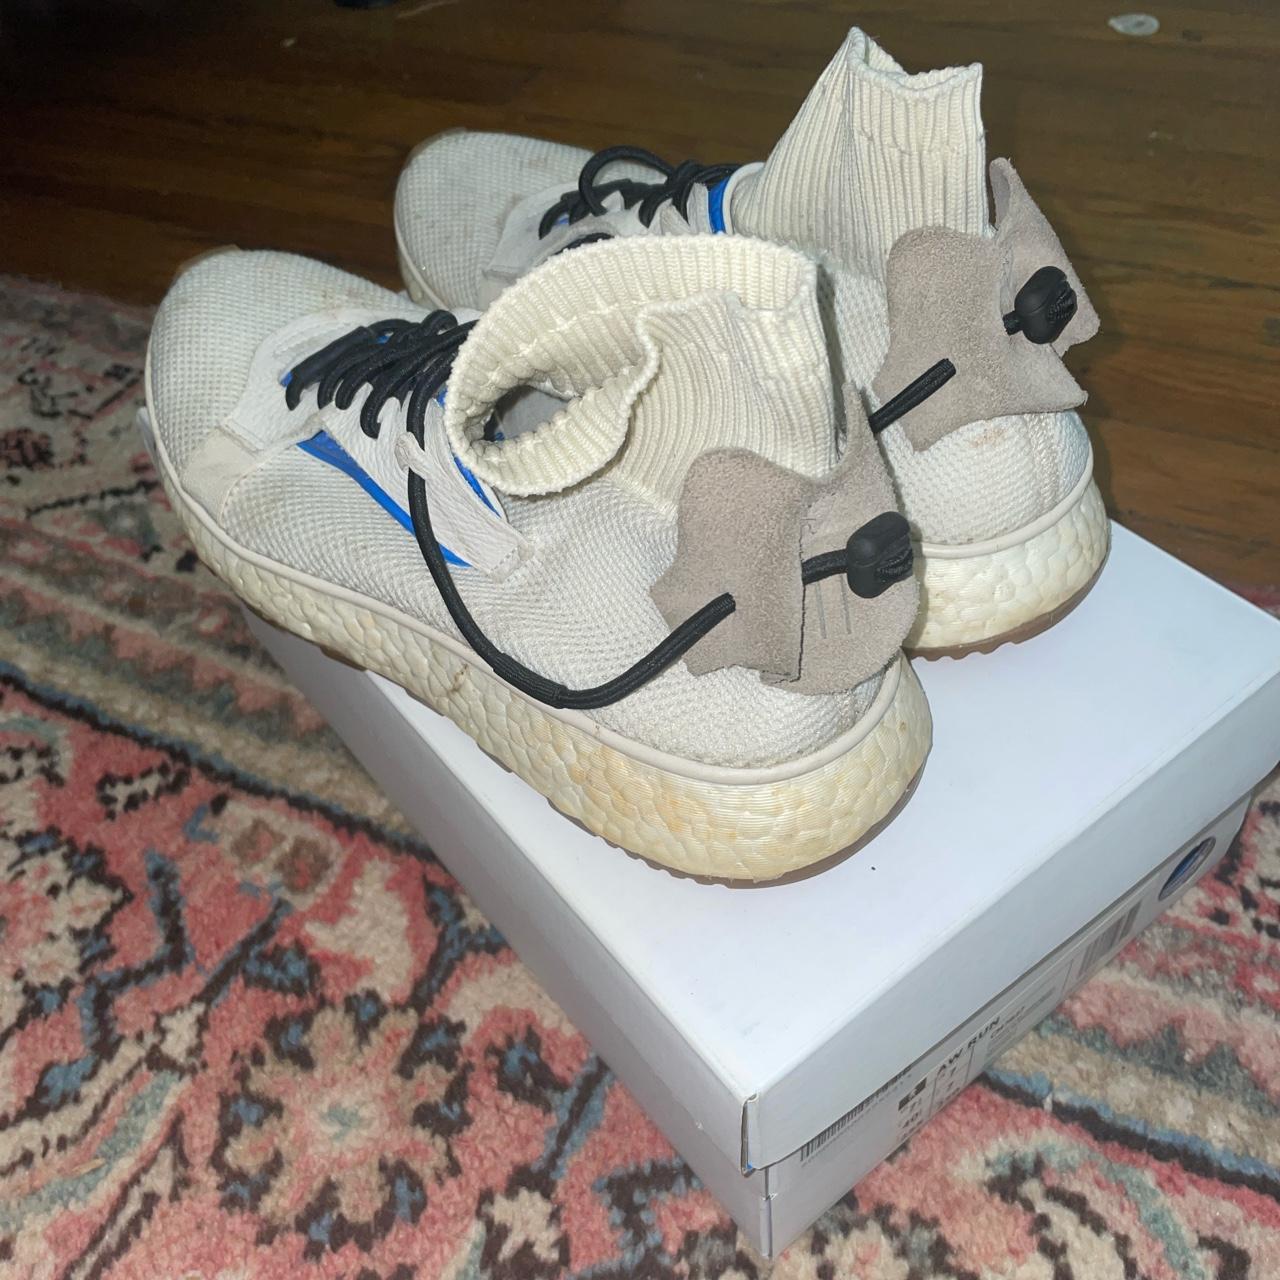 Alexander Wang Men's White and Blue Trainers (3)